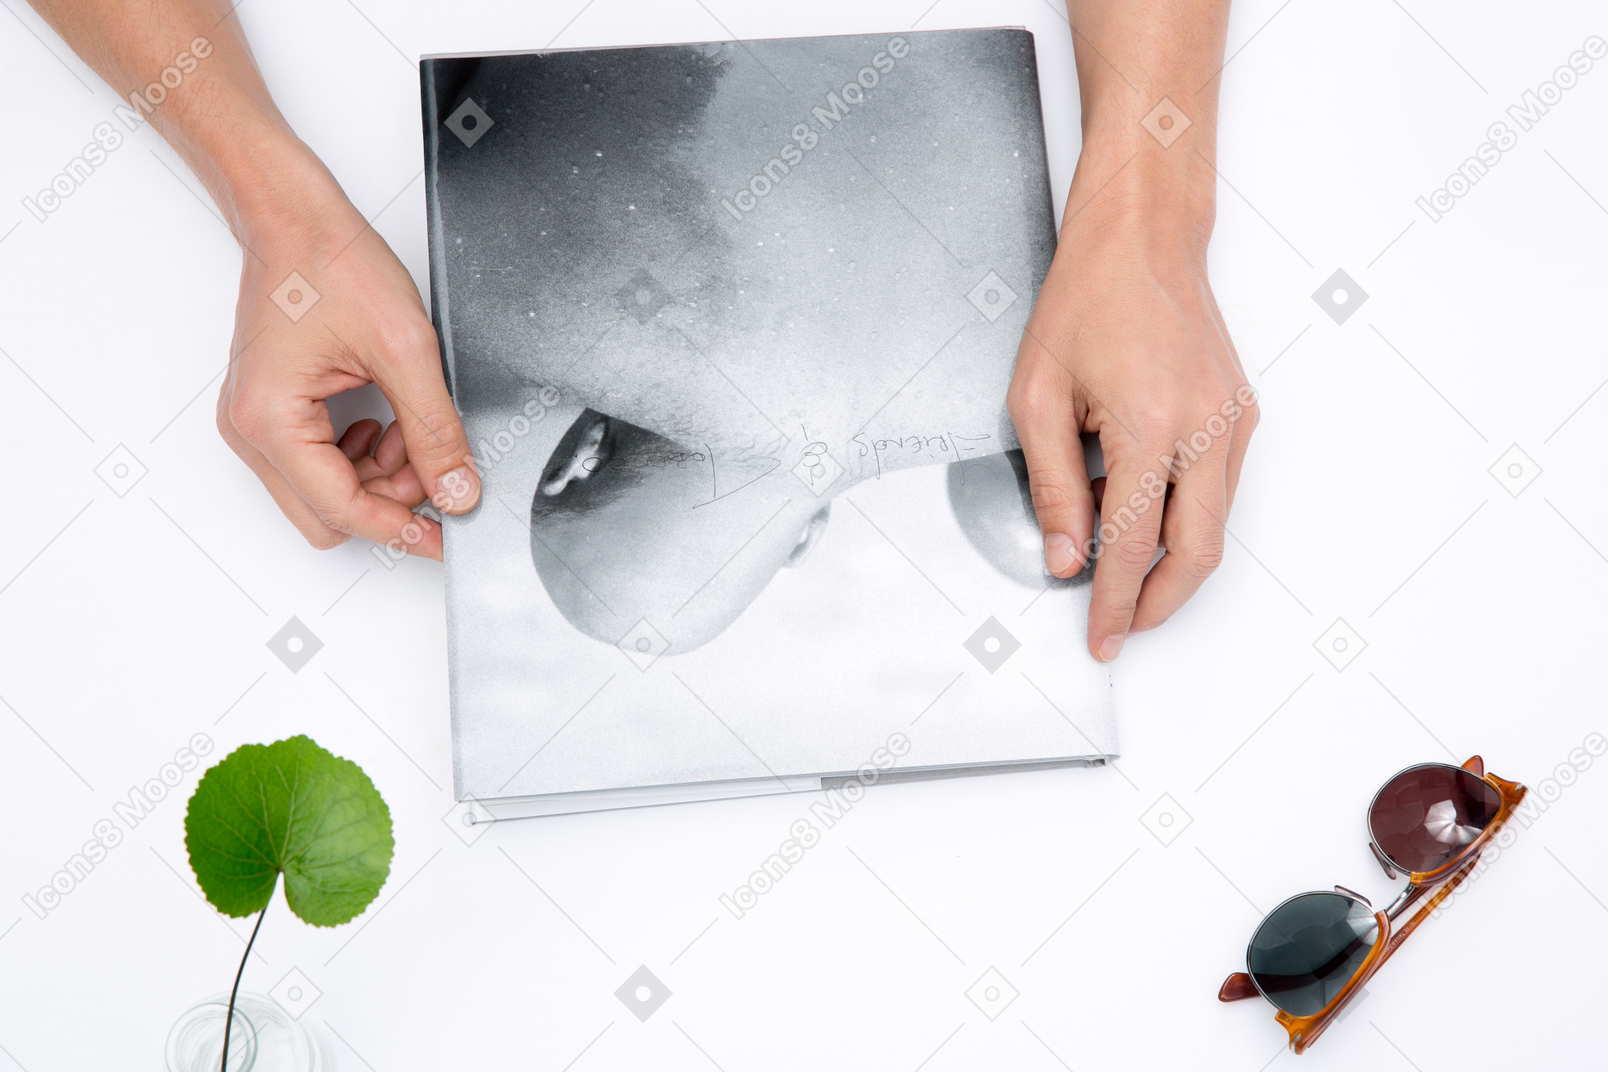 Male hands holding a photo album